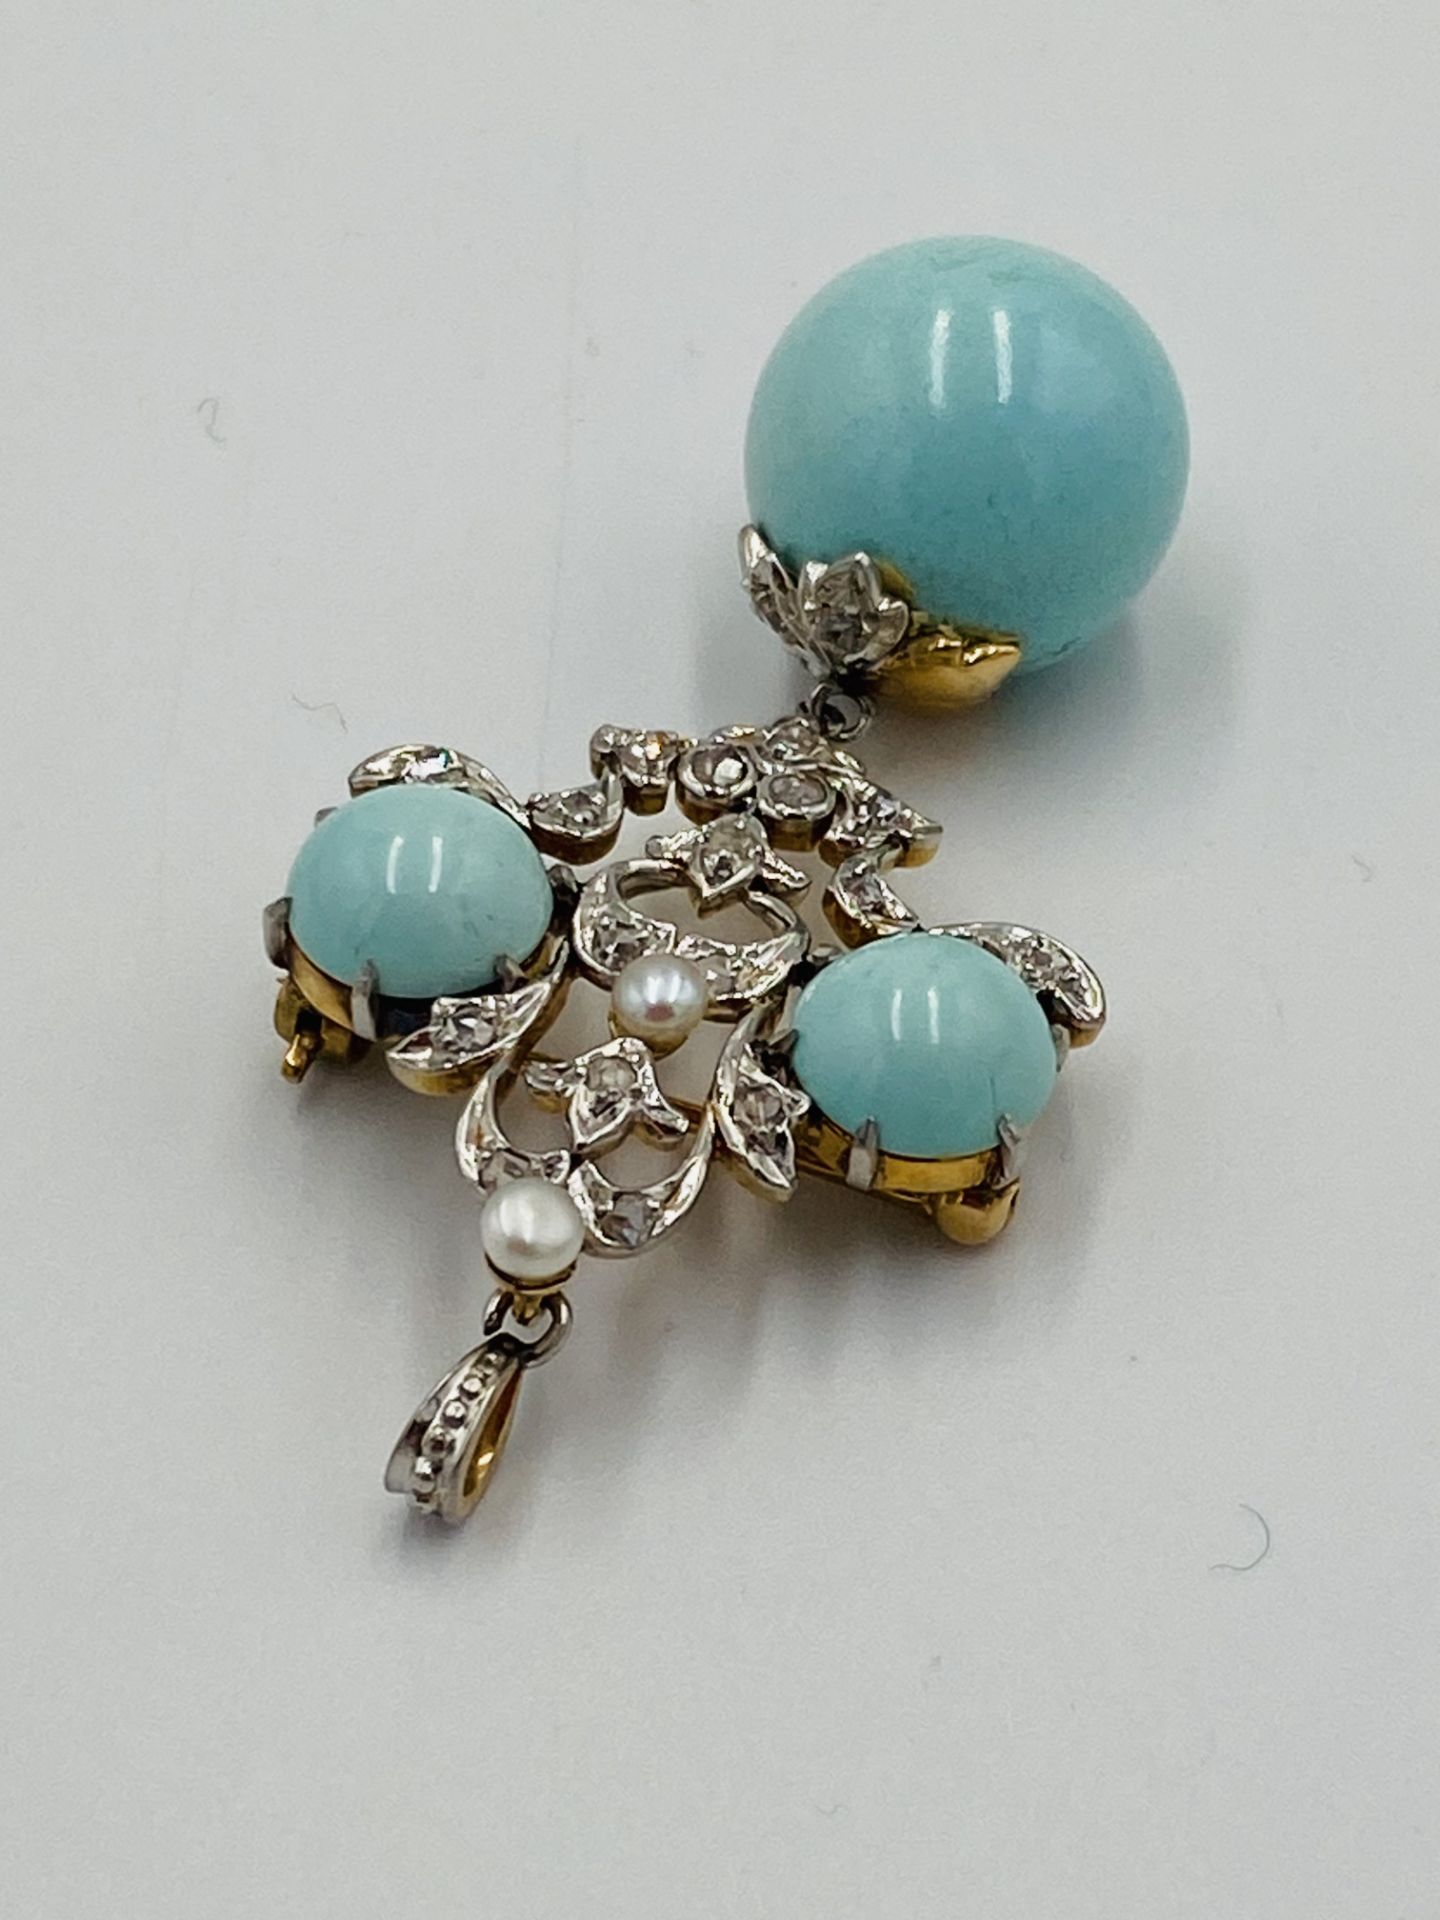 Turquoise and diamond brooch/pendant - Image 2 of 5